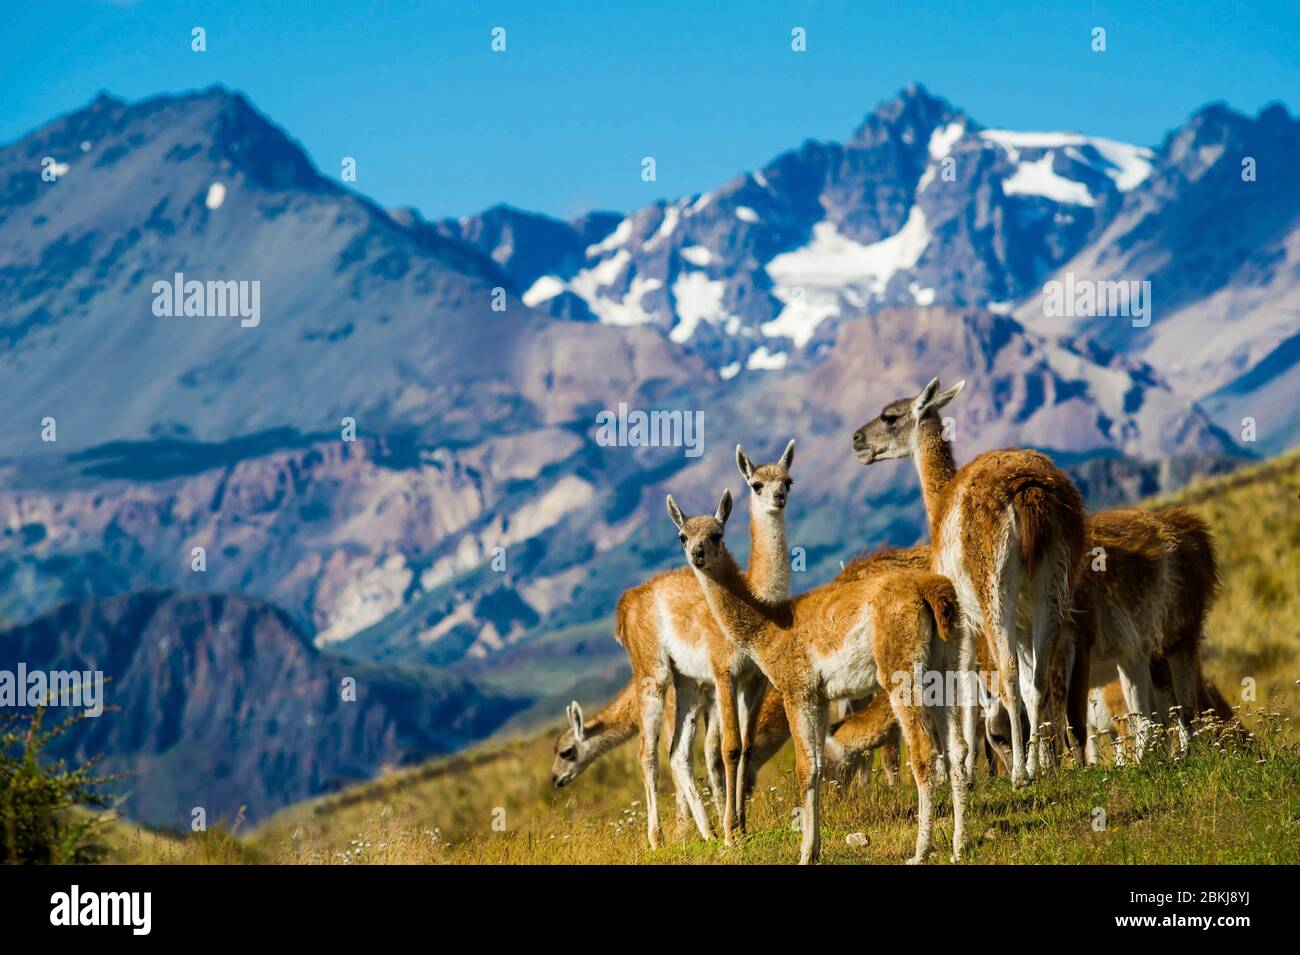 Chile, Patagonia, Aysen, Coyhaique, Patagonia National Park which on the border with Argentina, guanacos herd Stock Photo